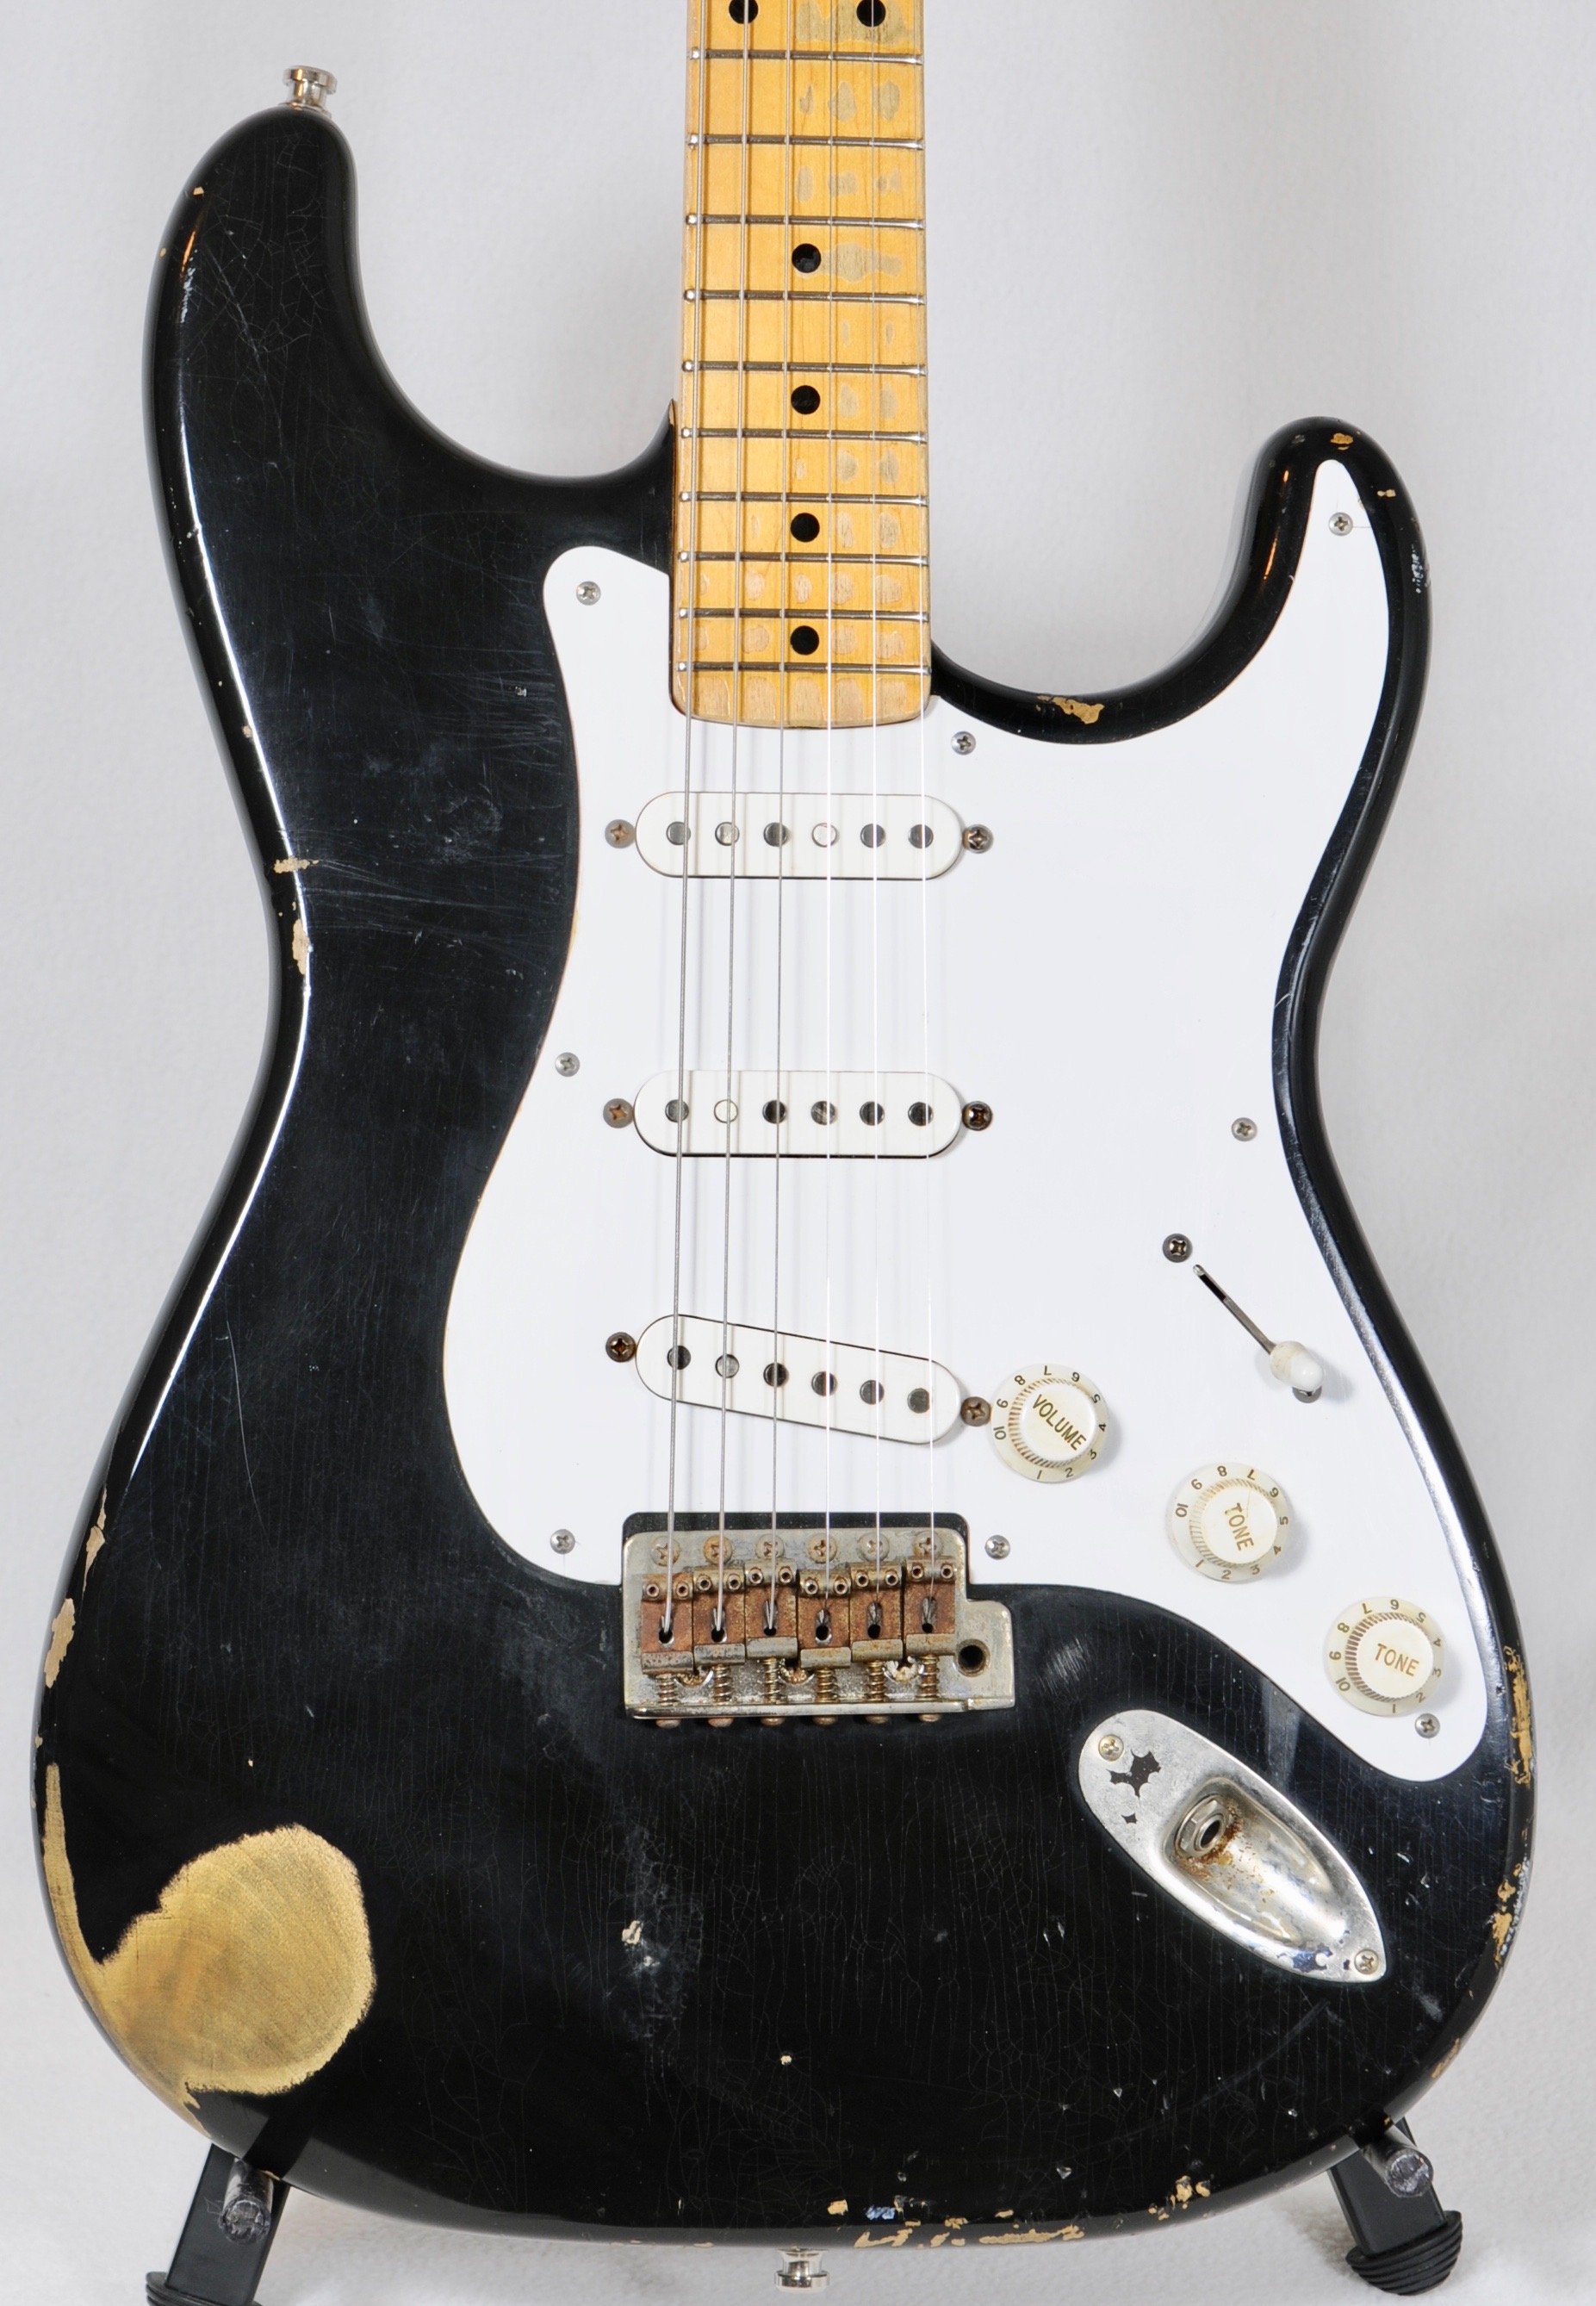 SEUF Stratocaster – VALUE ALERT! WOW guitar at competitive price!